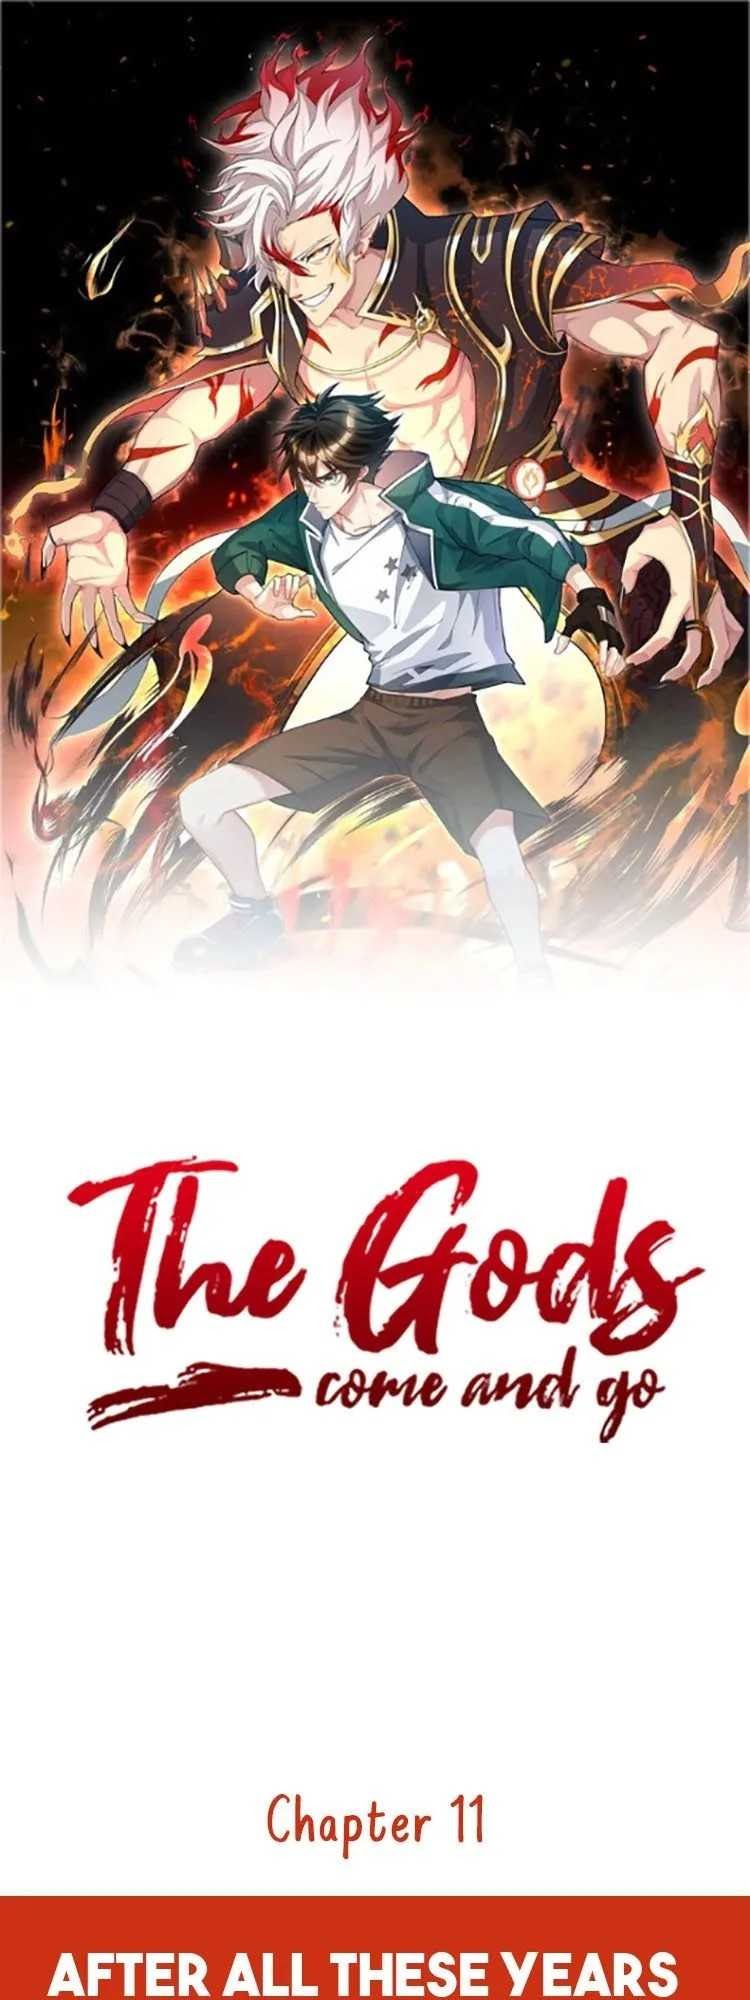 The Gods, Comes and Go Chapter 11